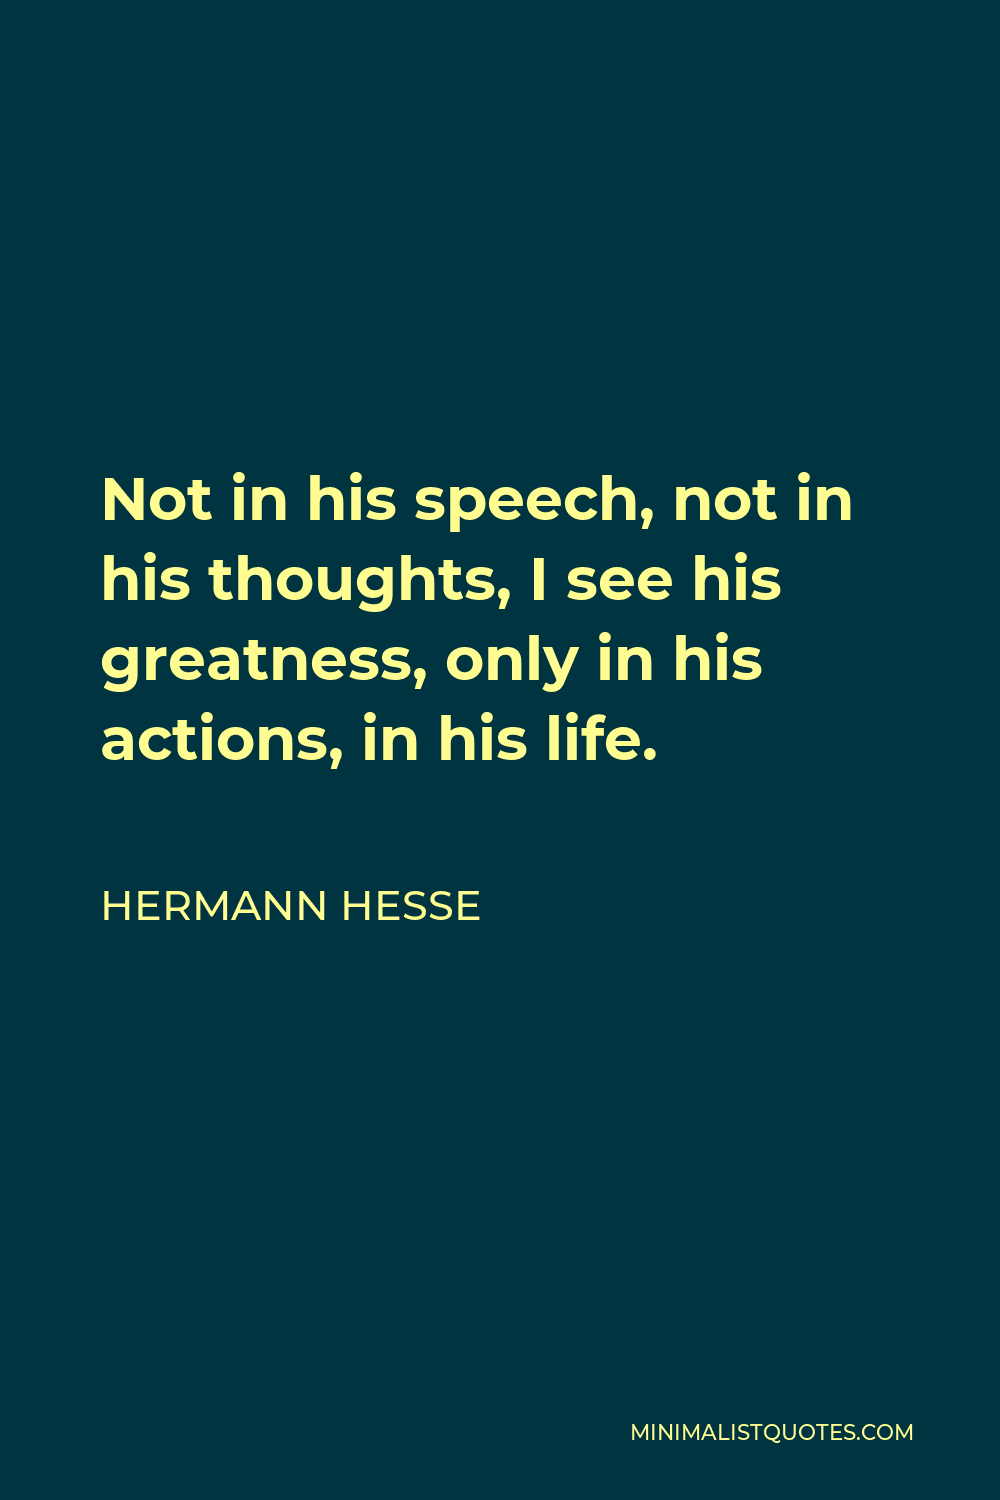 Hermann Hesse Quote - Not in his speech, not in his thoughts, I see his greatness, only in his actions, in his life.